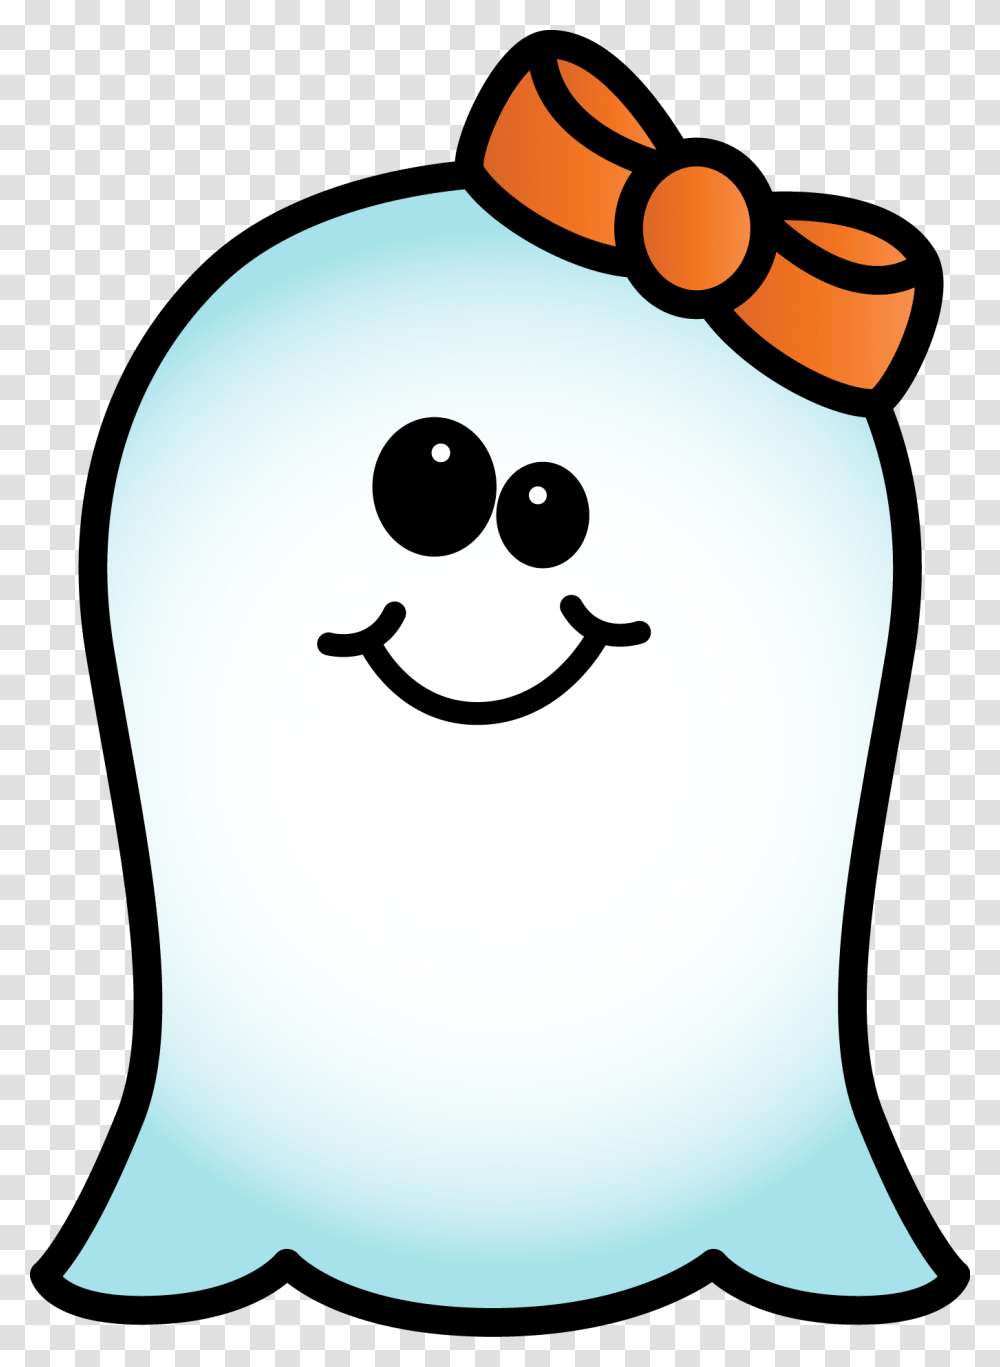 Image Result For Cute Girl Ghost Clipart Halloween, Stencil, Snowman, Nature, Hand Transparent Png